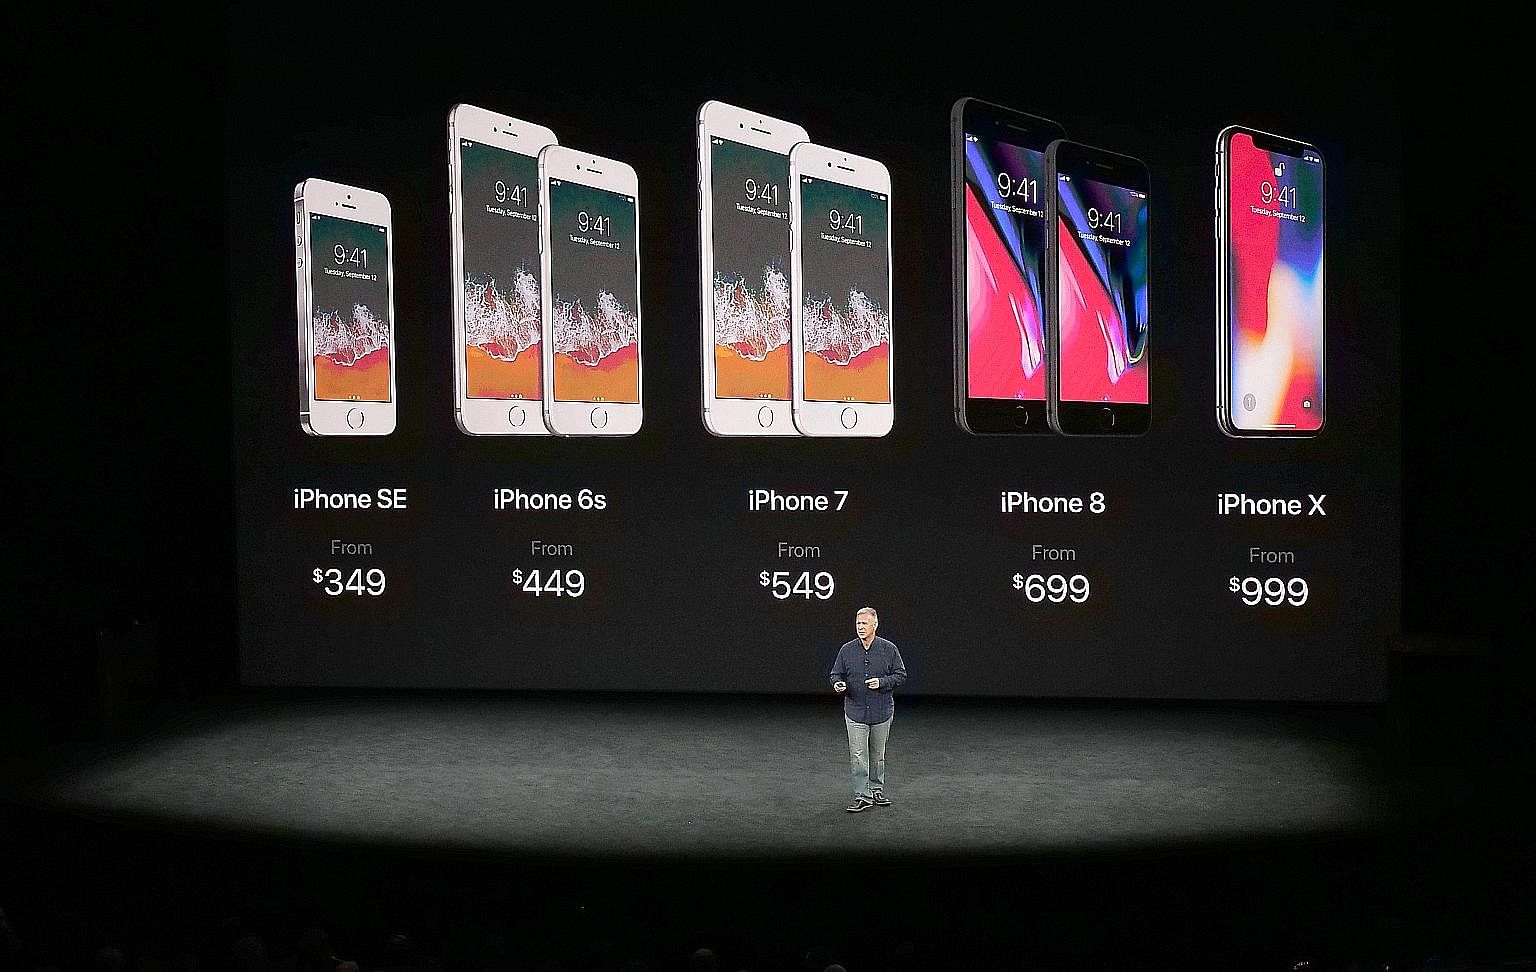 Apple marketing chief Phil Schiller showing the current line-up of iPhones during the special event held at Steve Jobs Theater in Cupertino earlier this month.